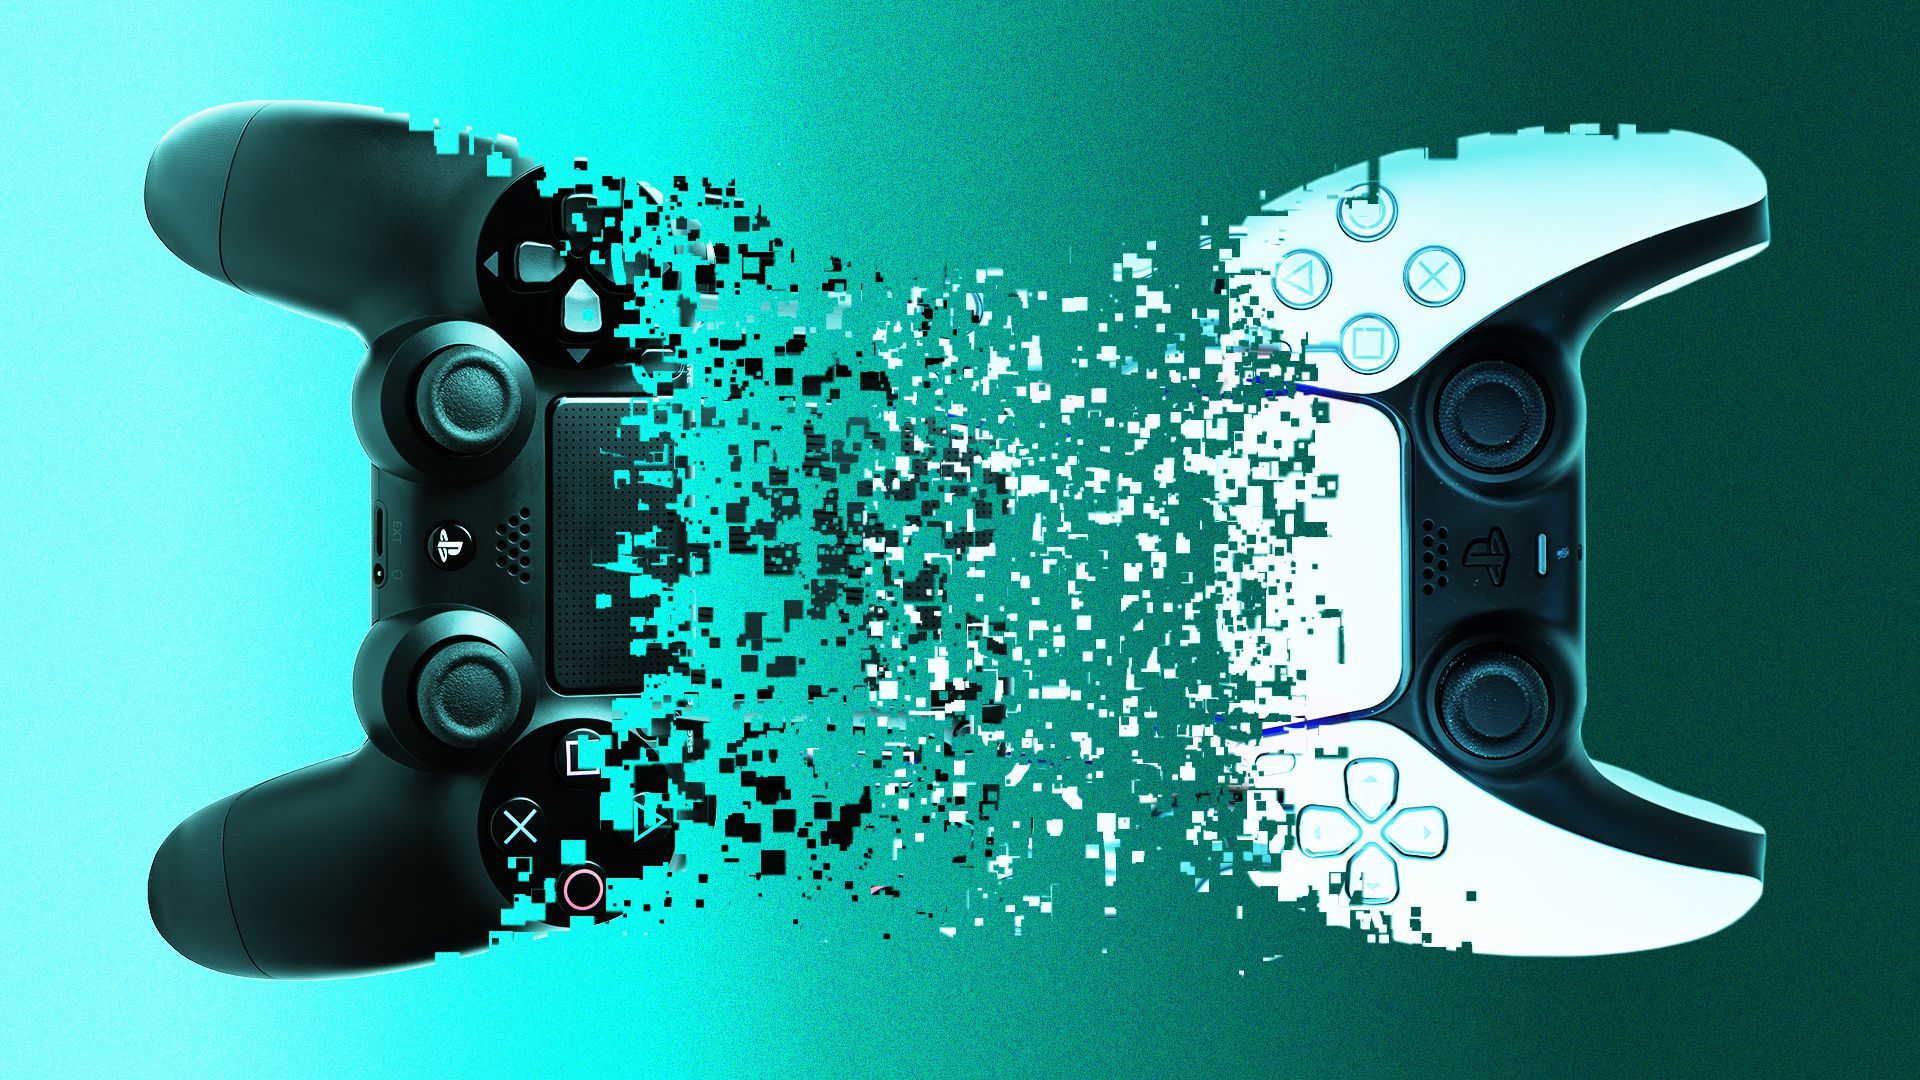 Illustration of PS4 and PS5 consoles dissolving into each other.